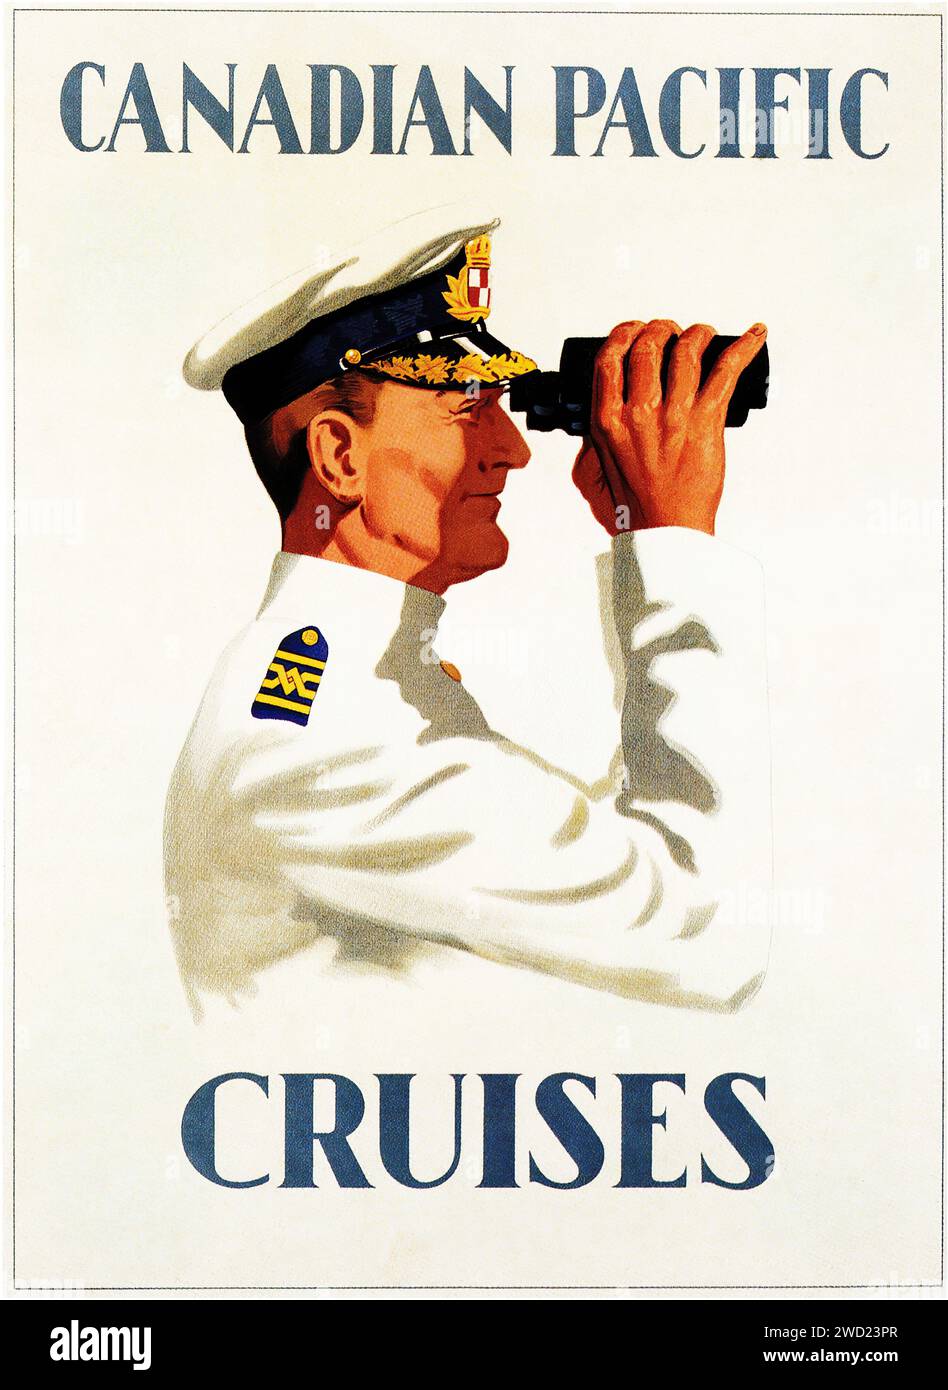 Canadian Pacific Cruises 1925   The 1925 Canadian Pacific Cruises poster features a close-up of a ship's captain looking through binoculars, against a clean white background. The focus on the captain suggests reliability and expertise, key selling points for cruise travel at that time.  This image has a more realistic style, with detailed rendering of the captain's features and uniform. The simplicity of the background highlights the central figure. Stock Photo